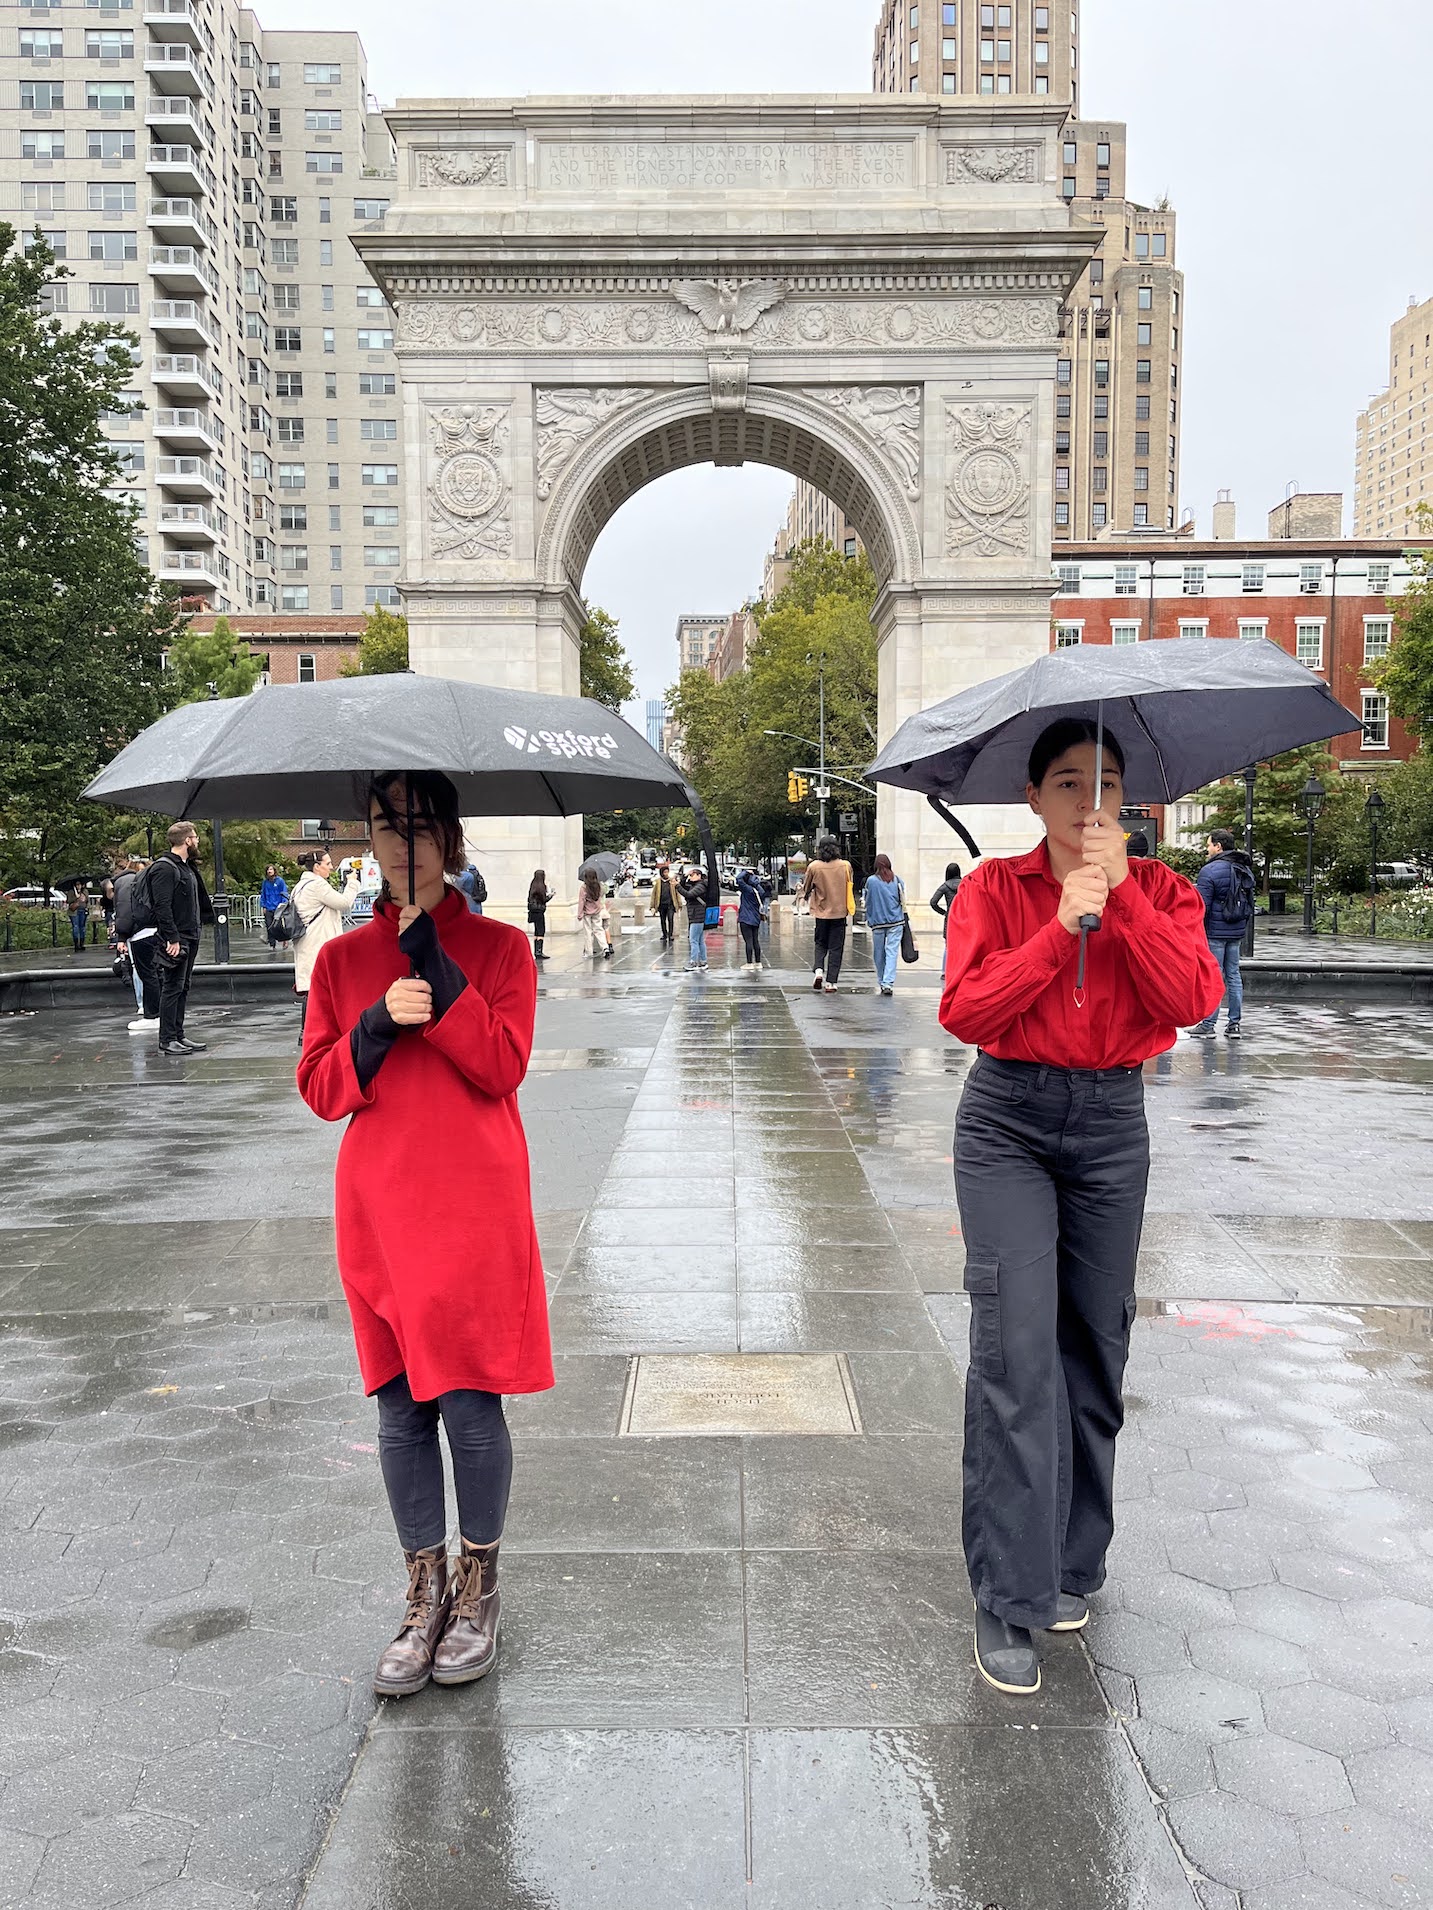 two people standing next to each other in the rain with umbrellas